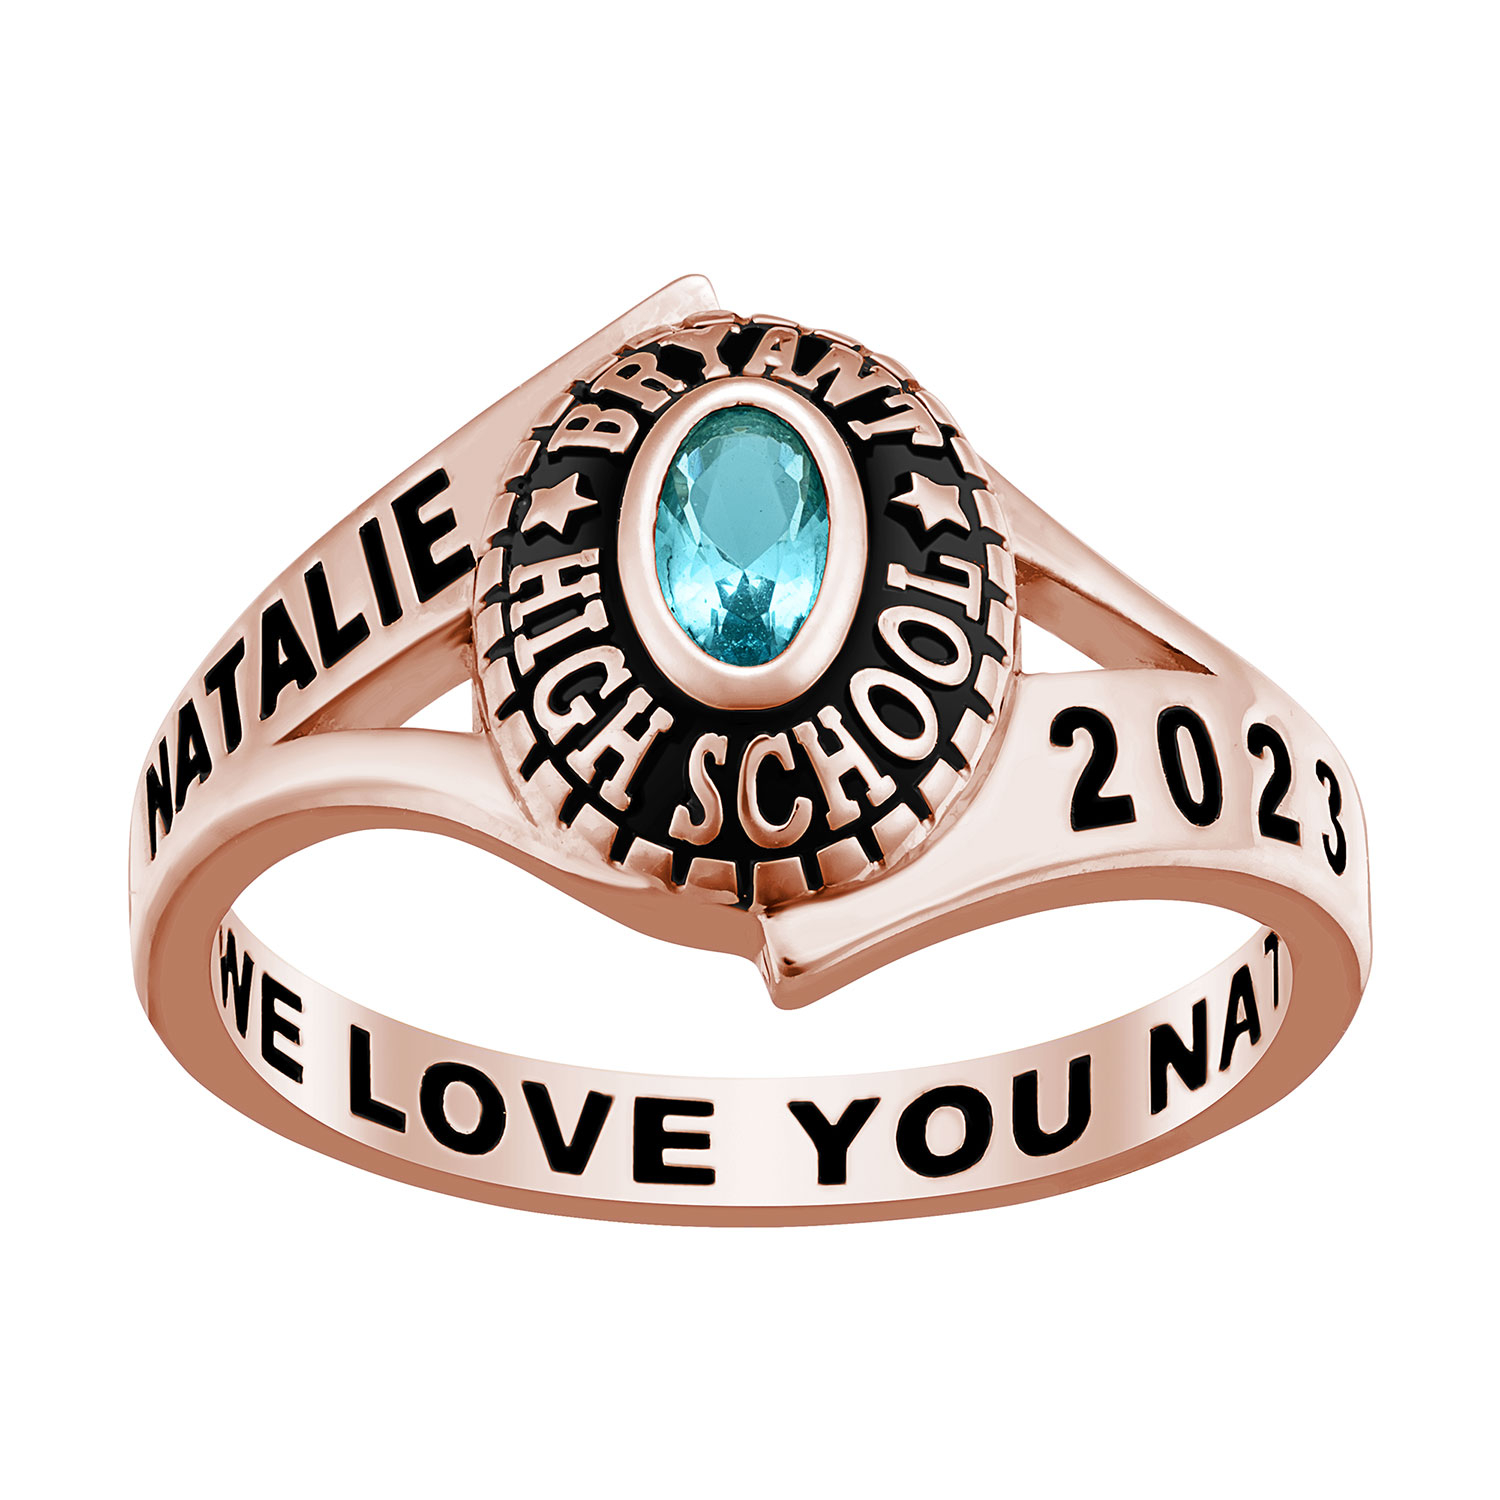 Ladies' Class Ring in Rose Gold Over Celebrium In Traditional Birthstone Styling